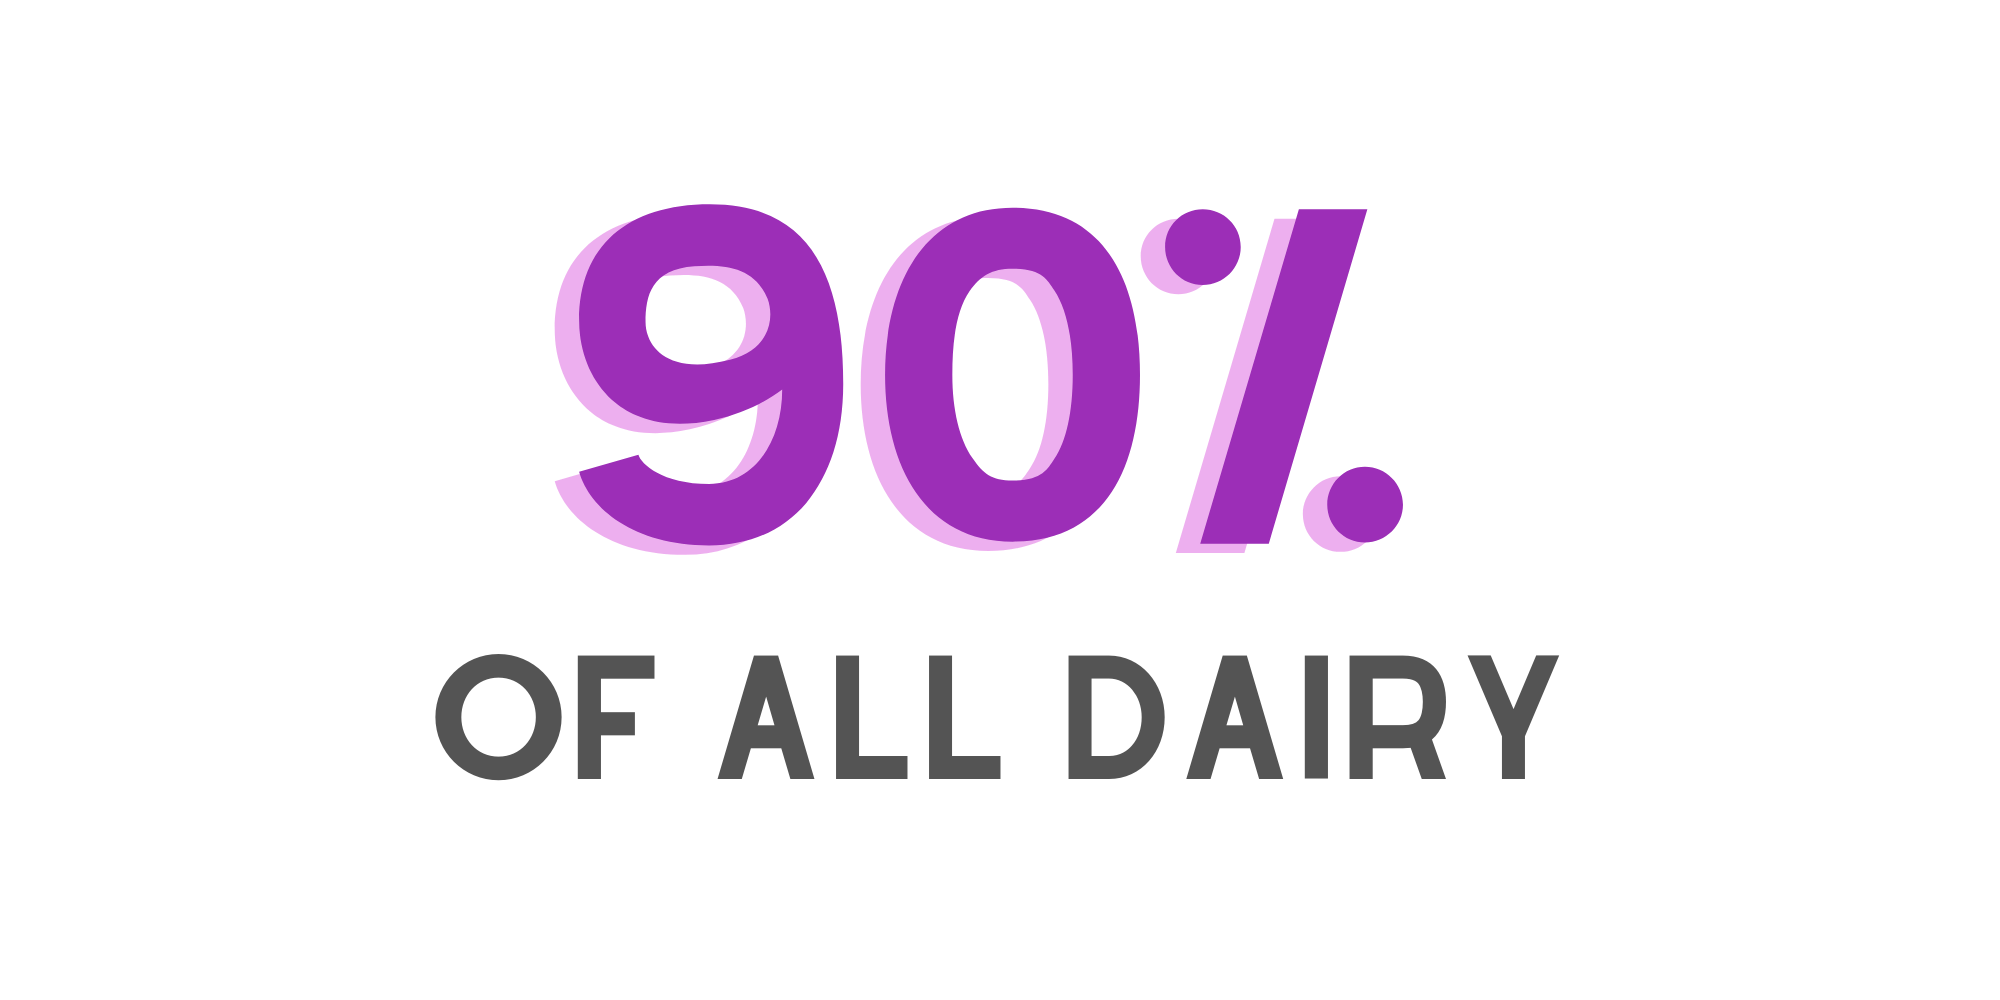 90% of dairy